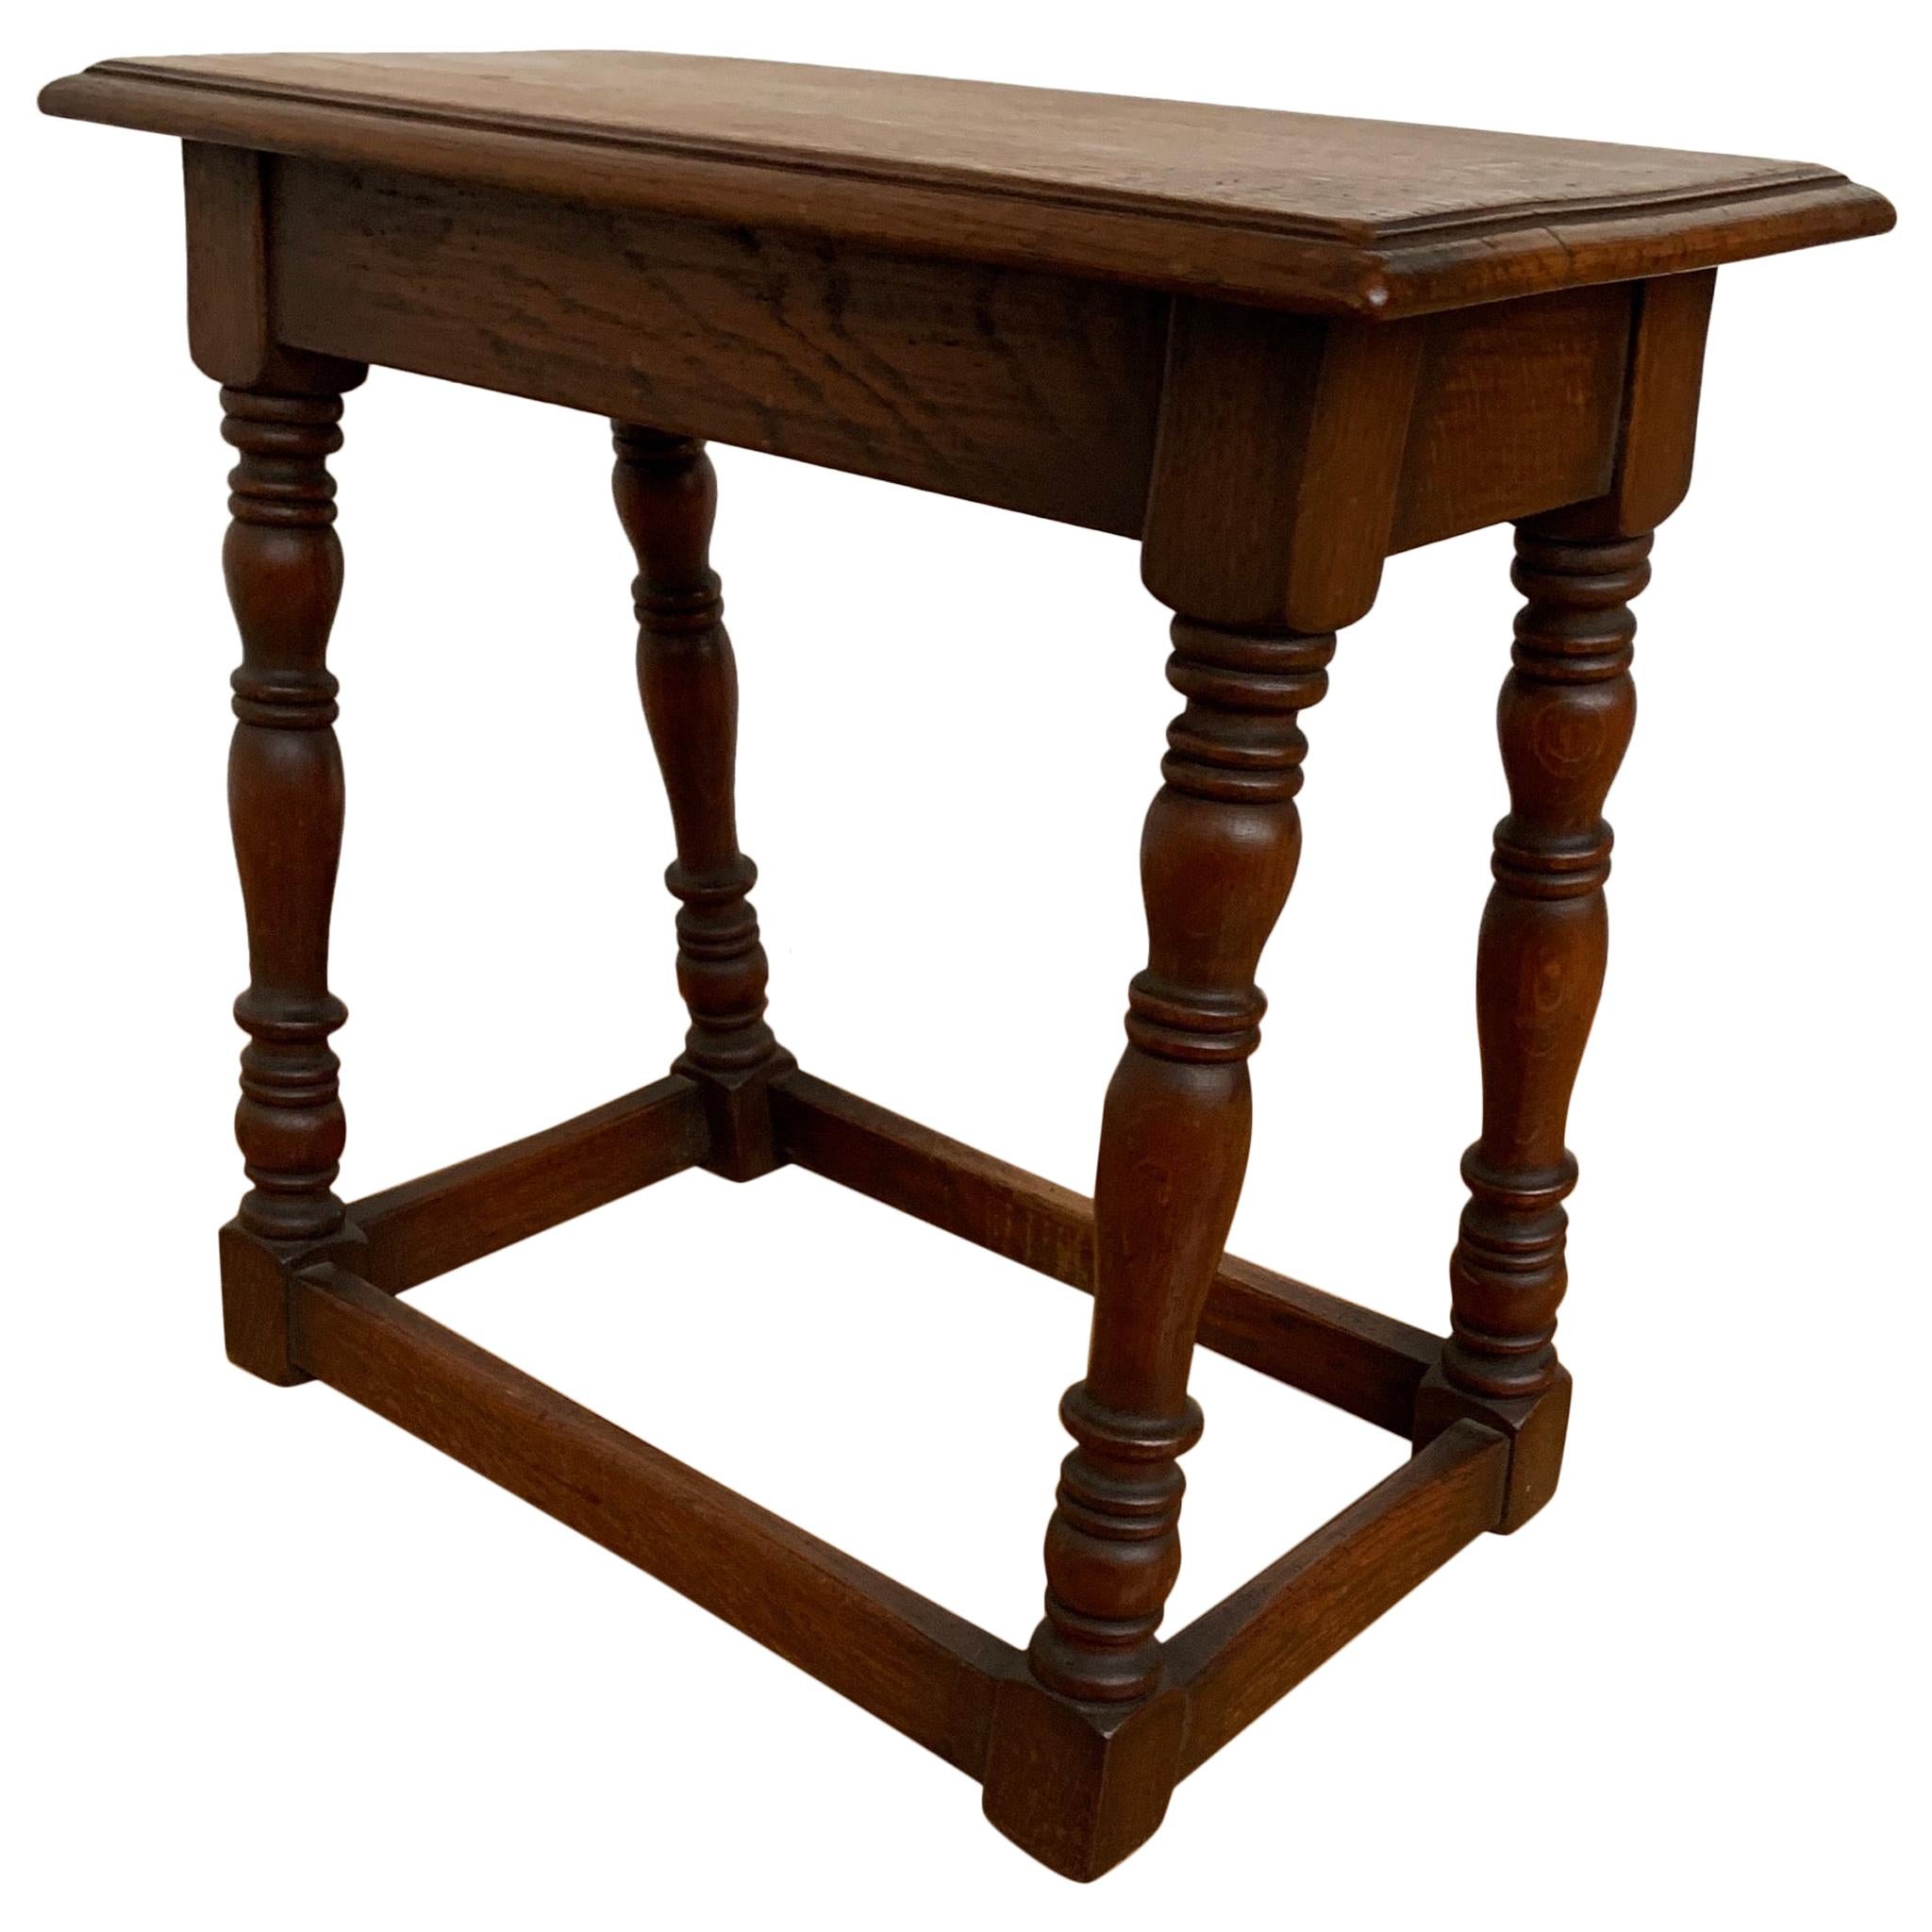 Late 1800s Antique, Handcrafted and Stable Solid Oak & Great Patina Joint Stool